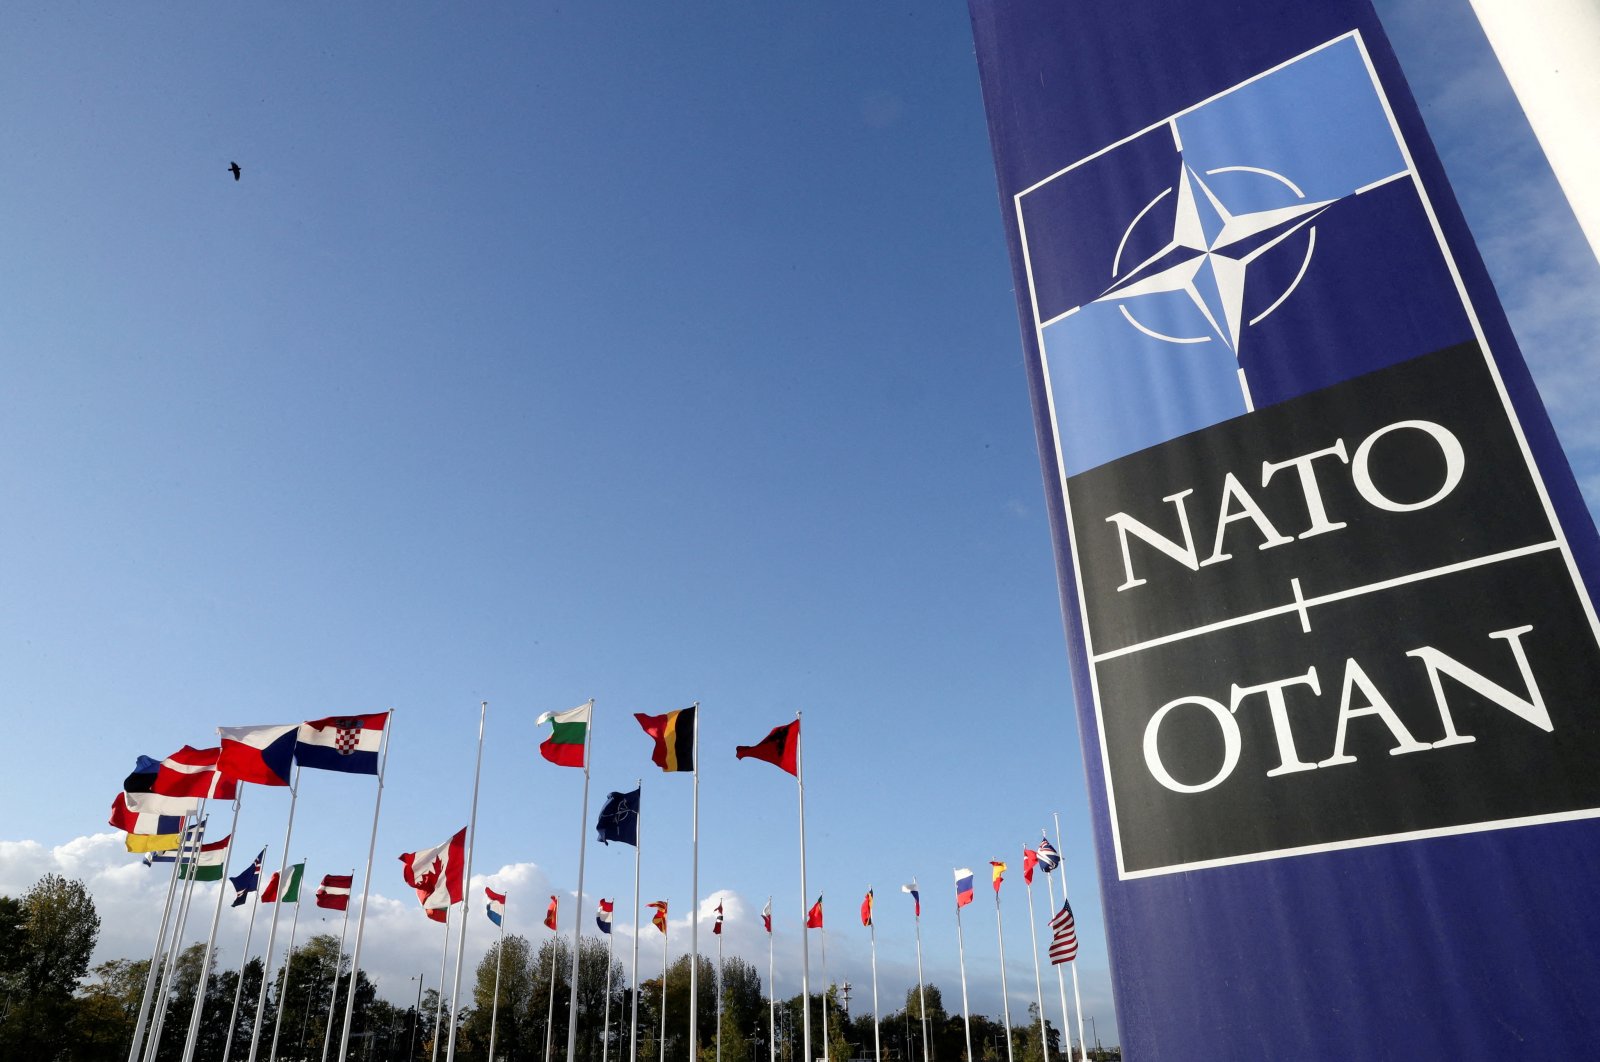 Flags wave outside NATO headquarters ahead of a NATO meeting, in Brussels, Belgium, Oct. 21, 2021. (Reuters Photo)